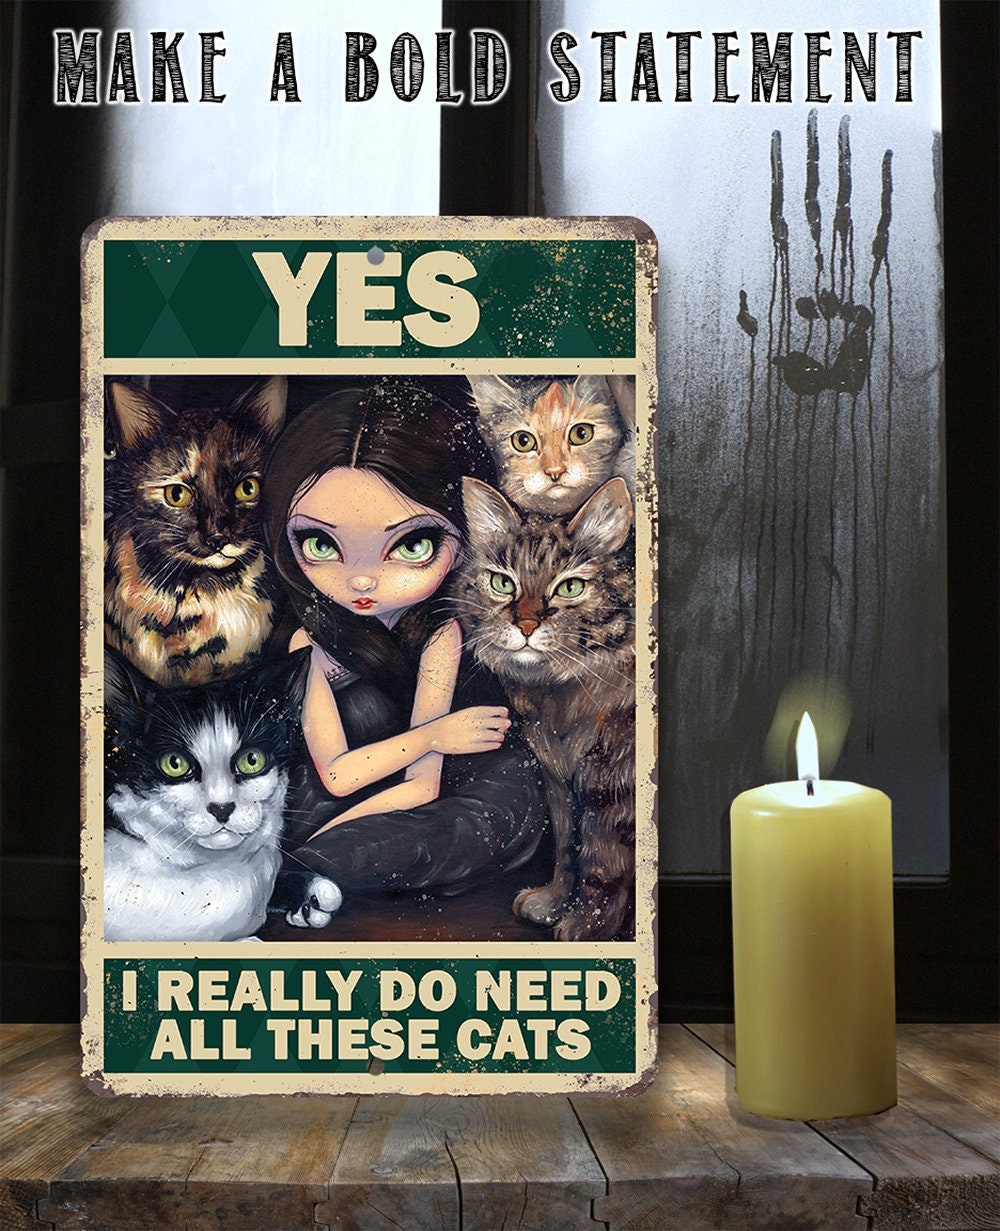 Yes I Really Do Need All These Cats - 8" x 12" or 12" x 18" Aluminum Tin Awesome Gothic Metal Poster Lone Star Art 